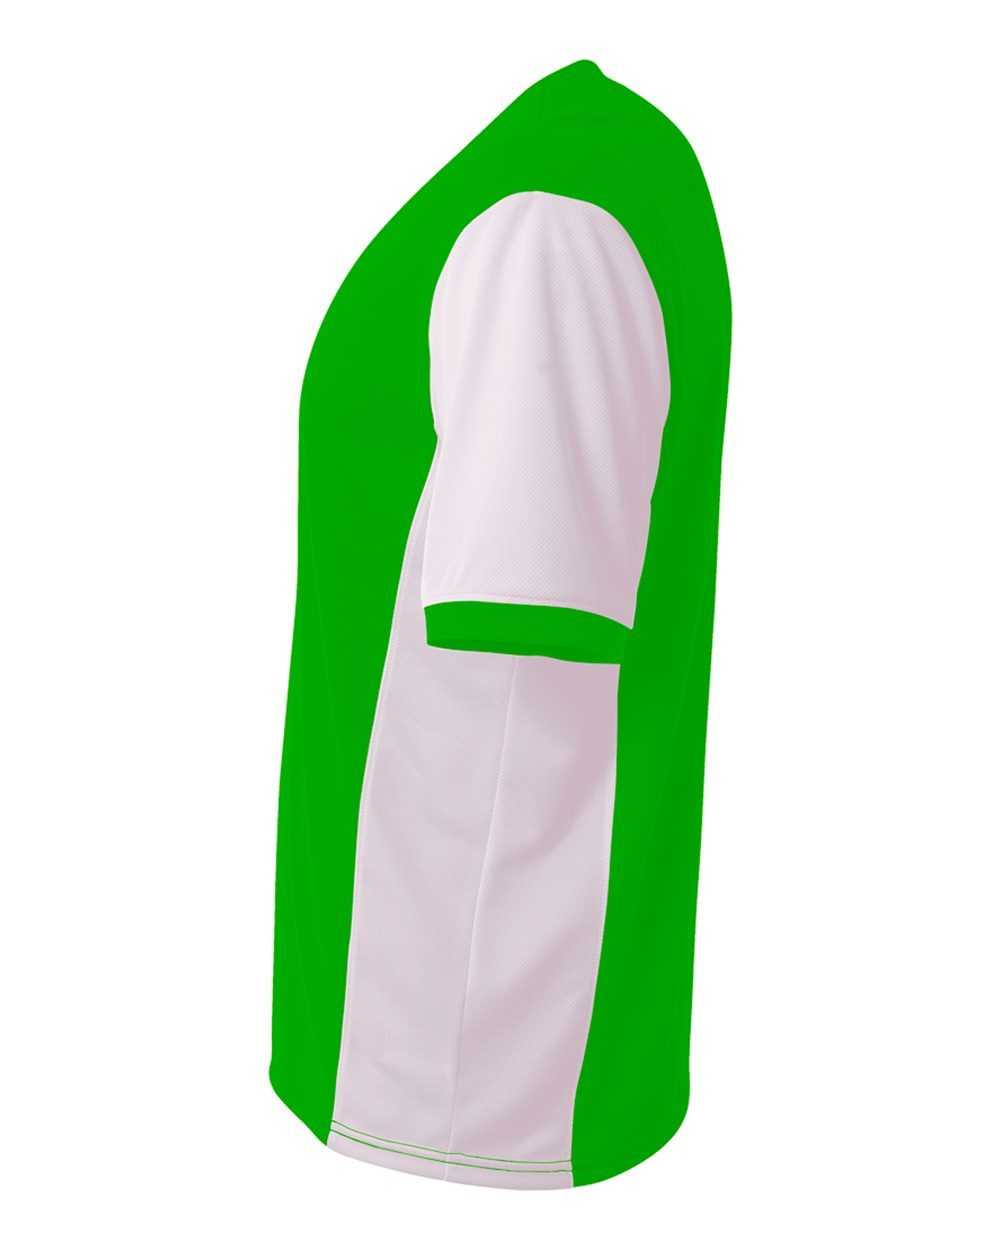 A4 N3017 Premier Soccer Jersey - Lime White - HIT a Double